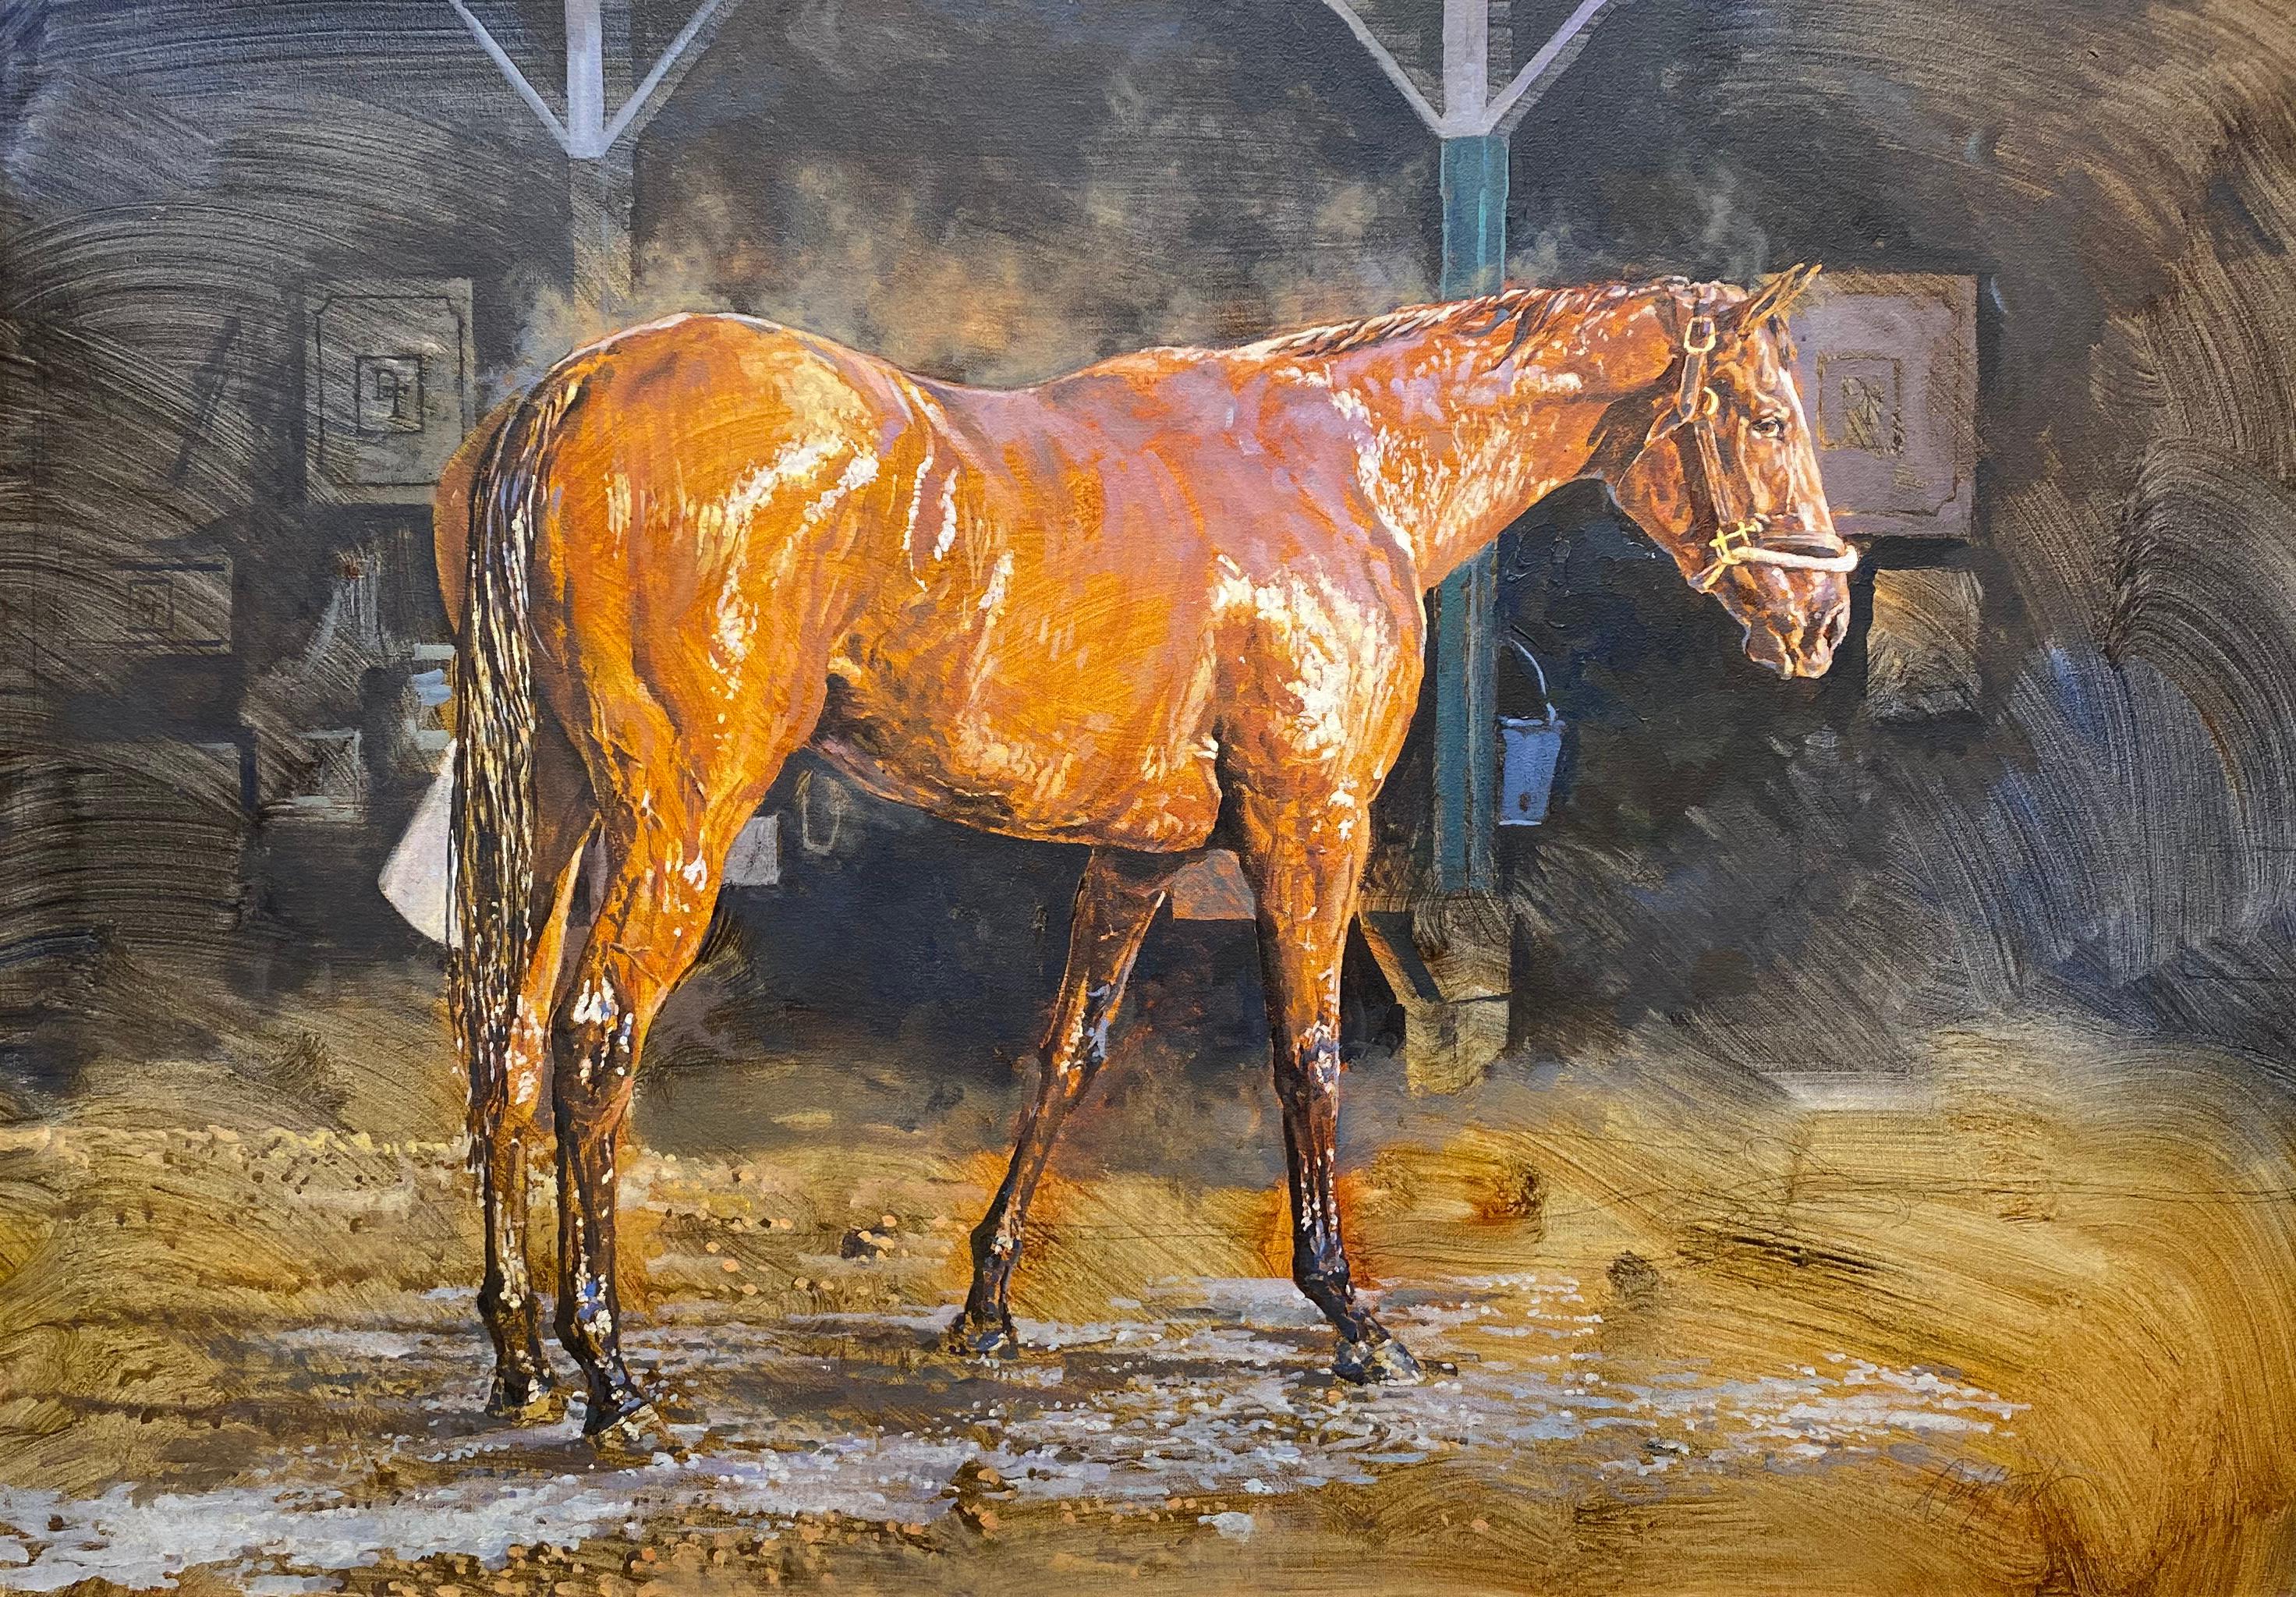 Dahl Taylor, "After the Bath", Equine Barn Oil Painting on Canvas, 24x34